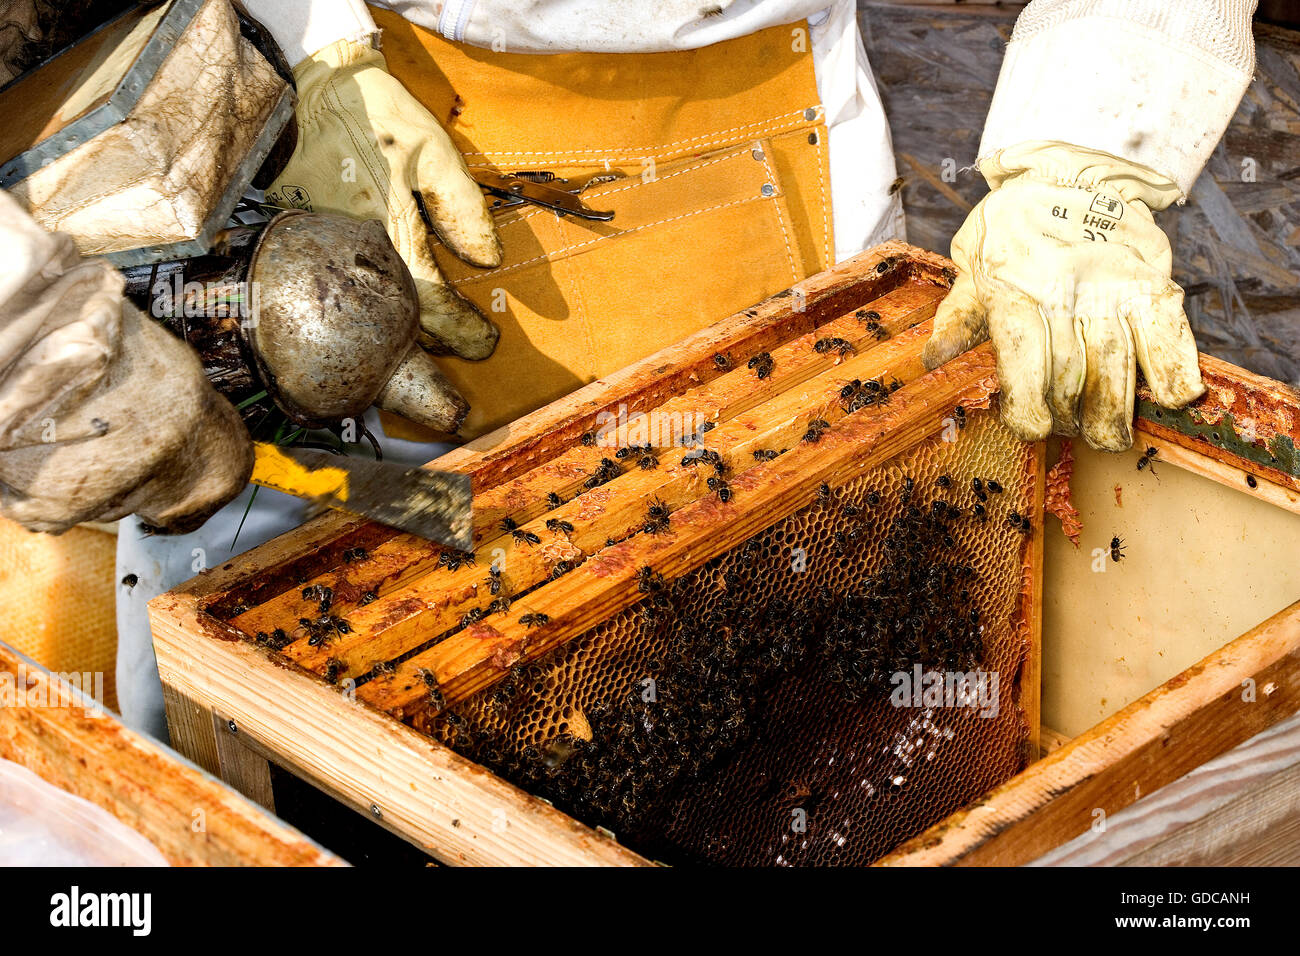 Honey Bee, apis mellifera, Worker looking after Larvae on Brood Comb, Man working on Bee Hive in Normandy Stock Photo